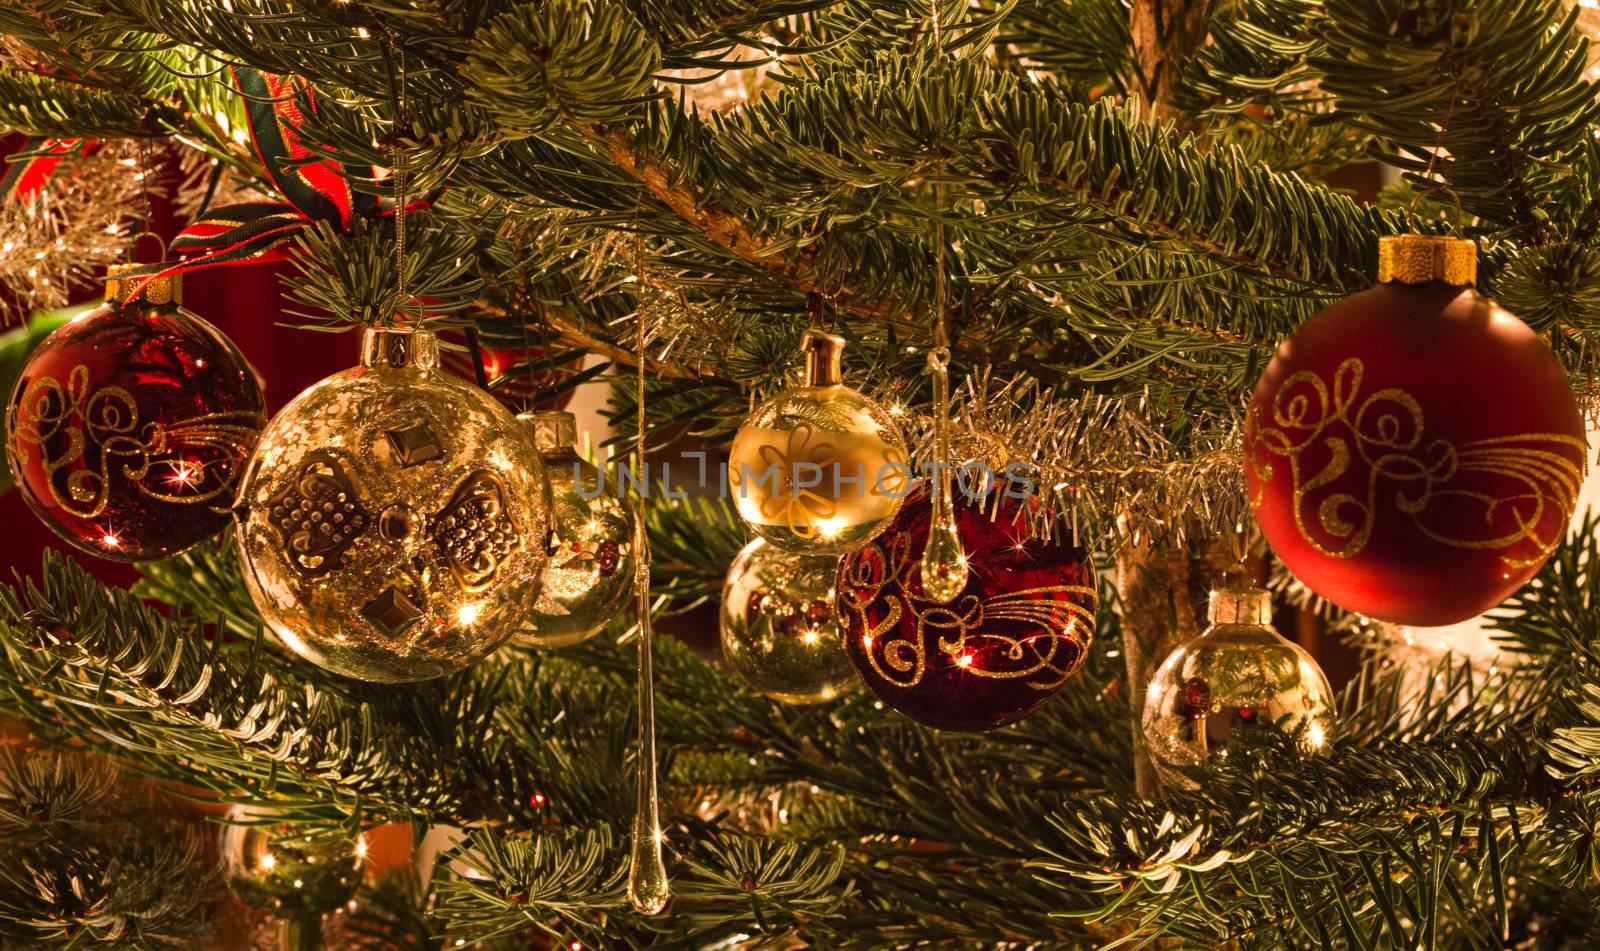 Colorful image of decoration in christmas tree in red, green and silver - horizontal image